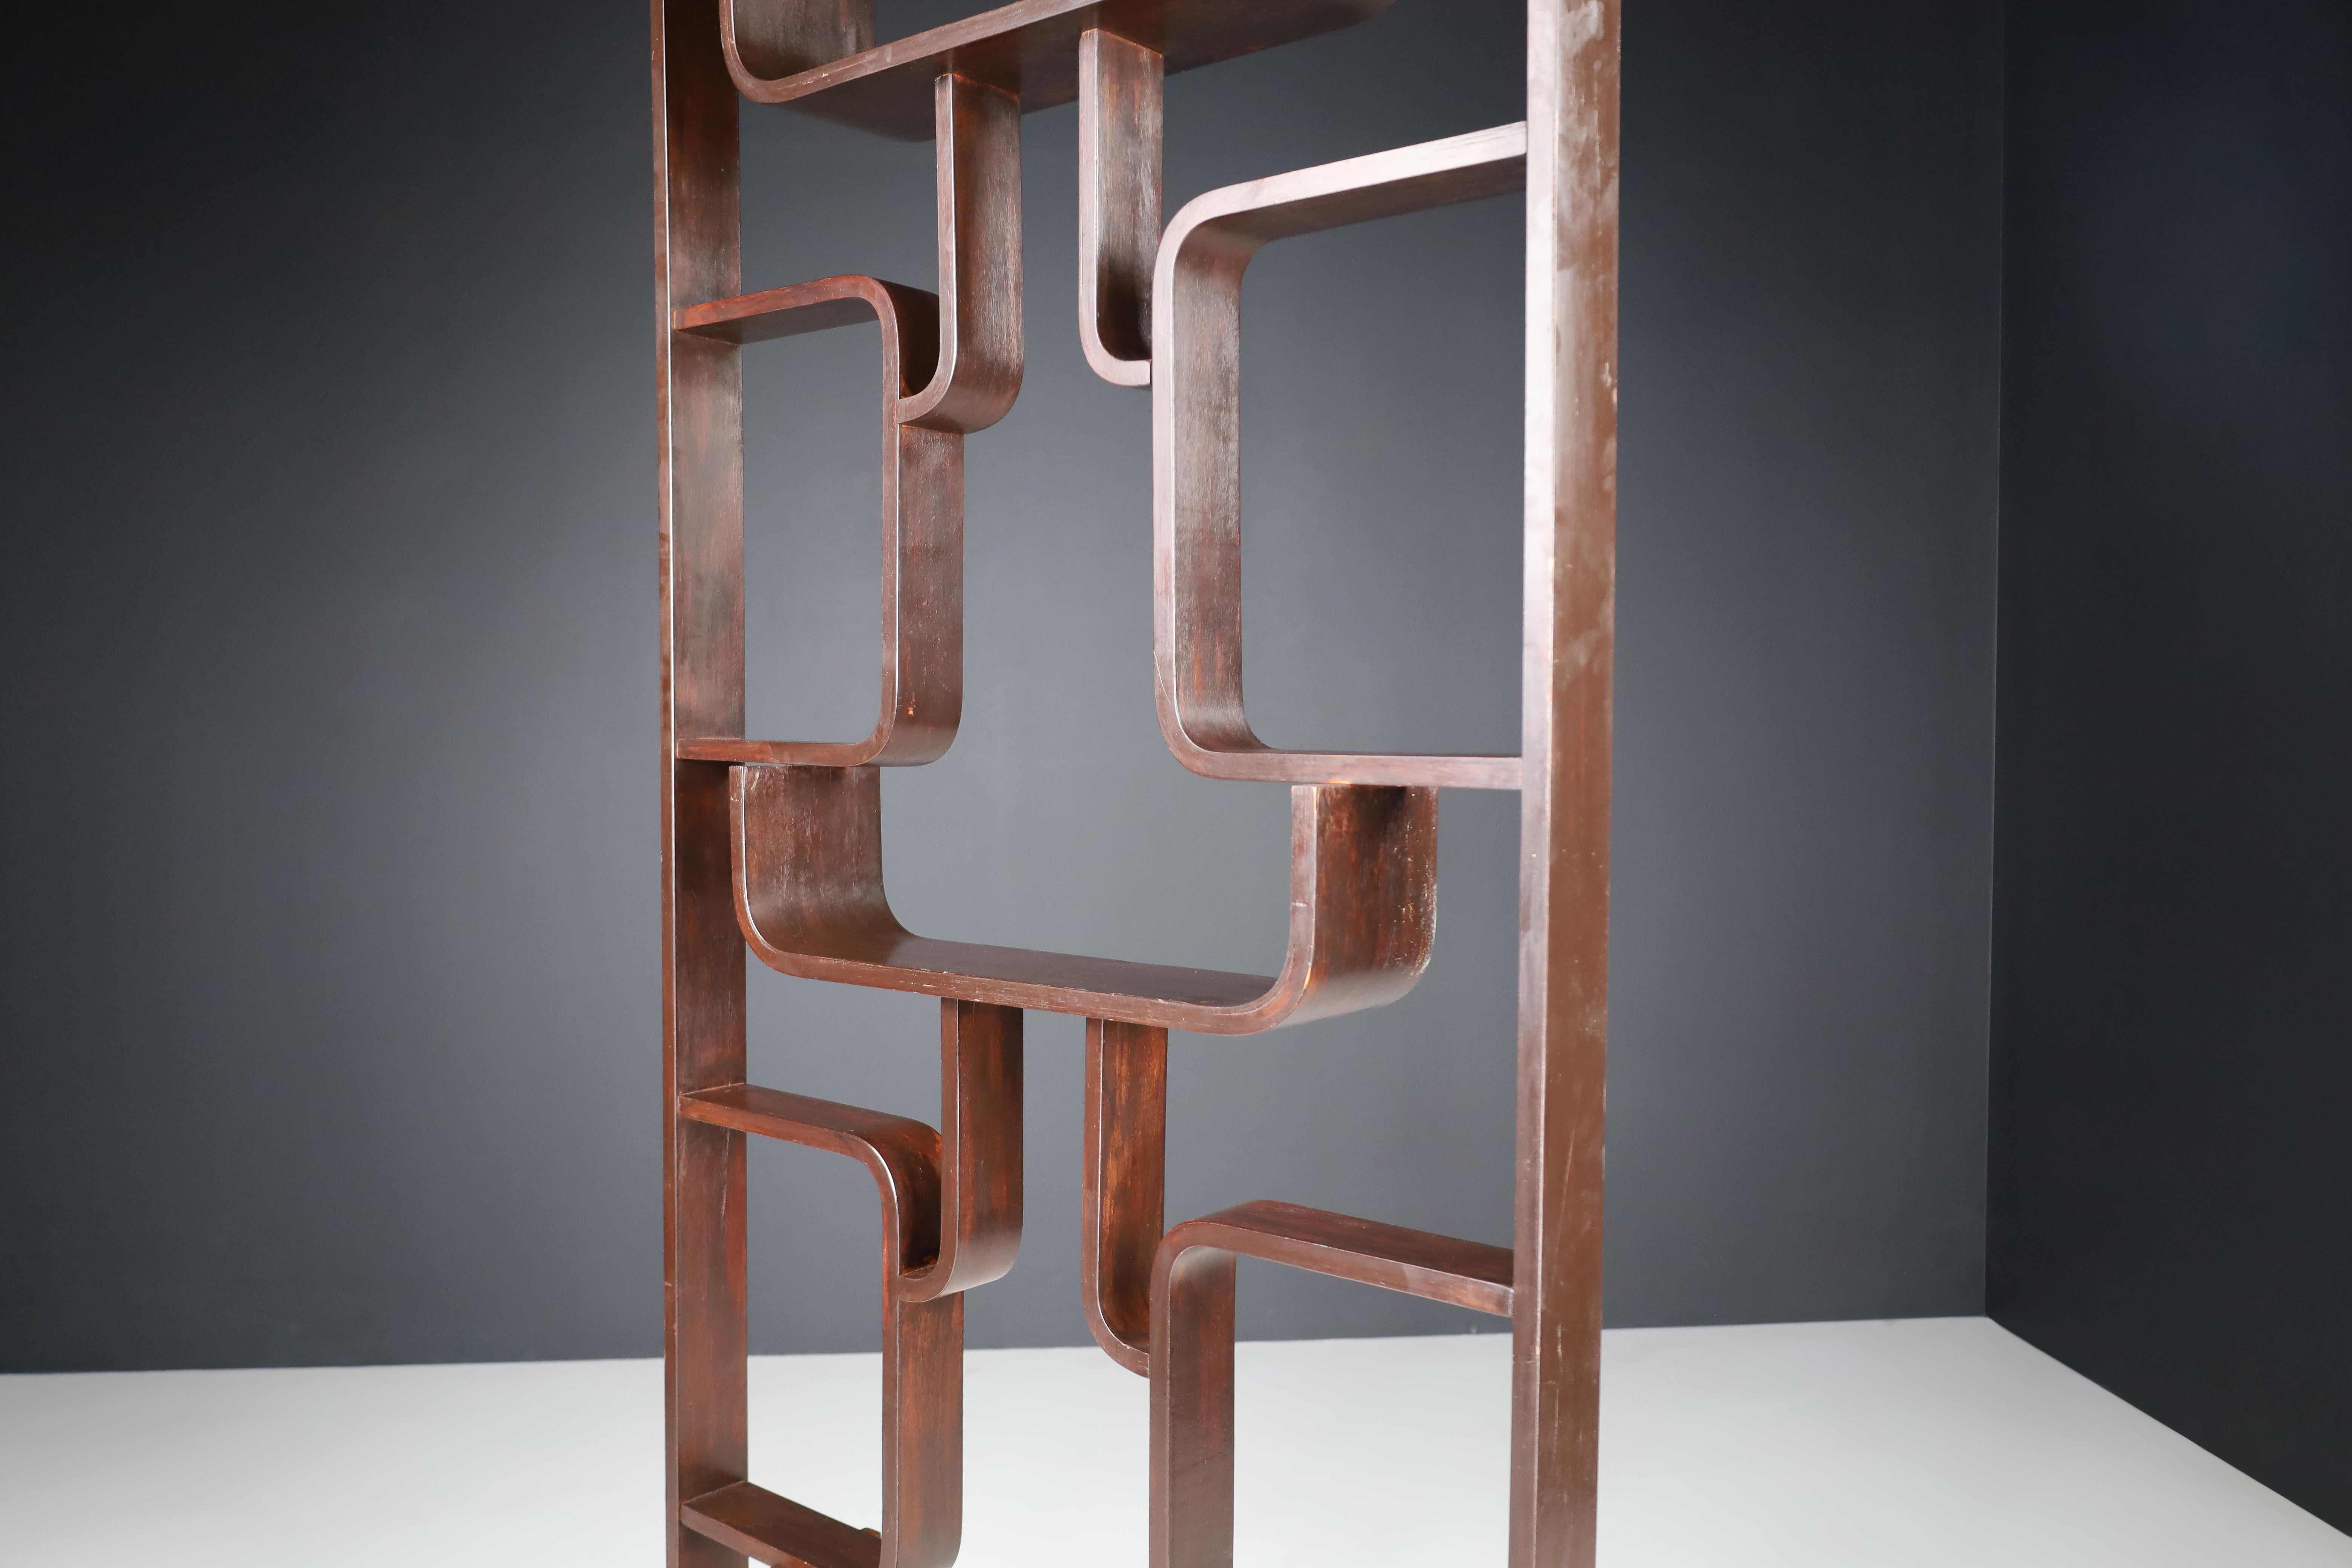 Czech Midcentury Room Divider in Dark Stained Bent-Wood by Ludvik Volak, Praque 1960s For Sale